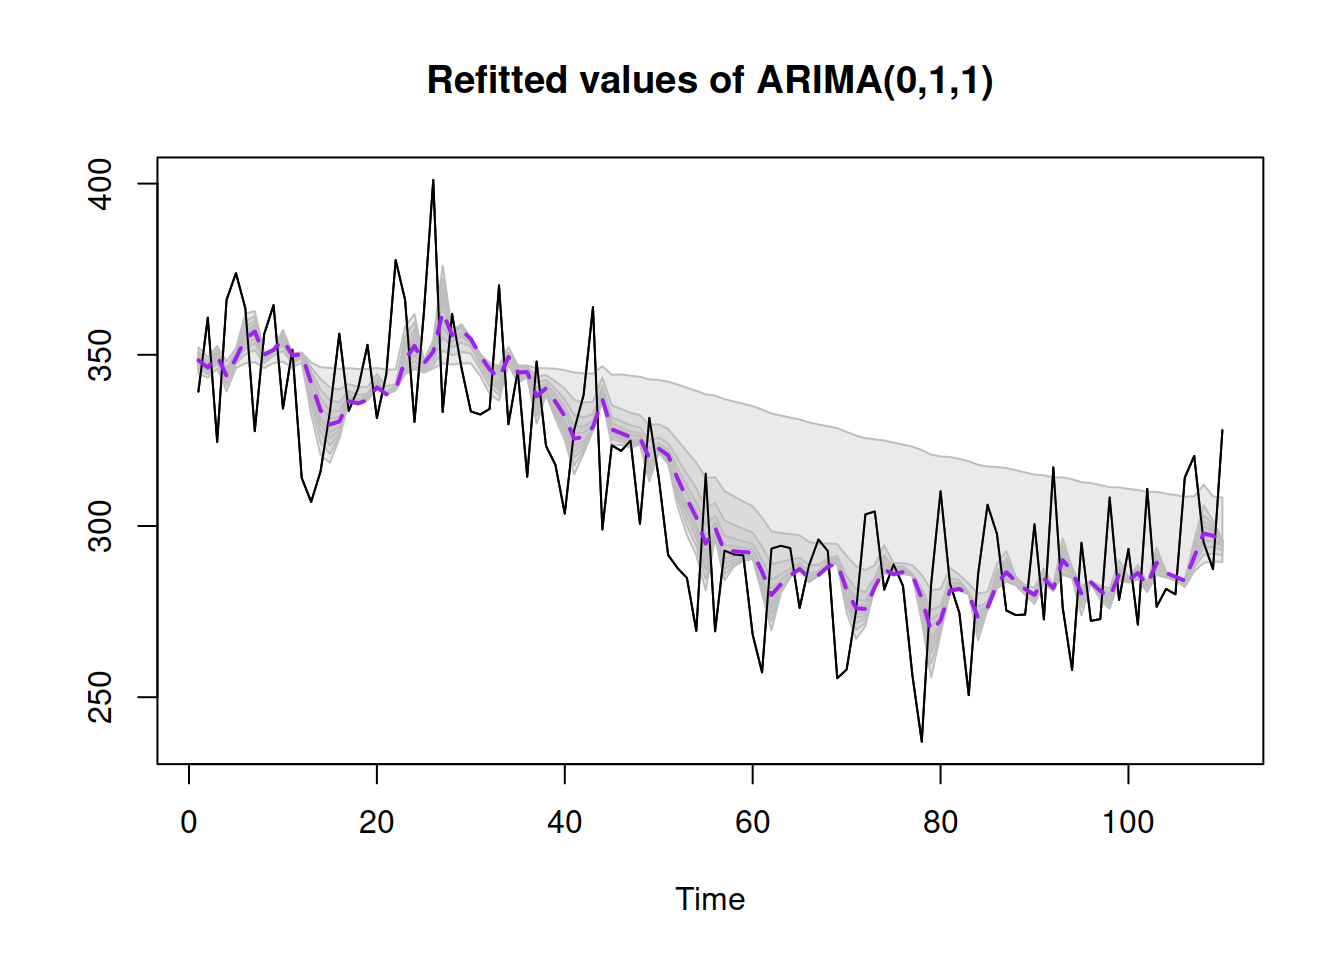 Refitted ADAM ARIMA(0,1,1) model on artificial data, bootstrapped covariance matrix.